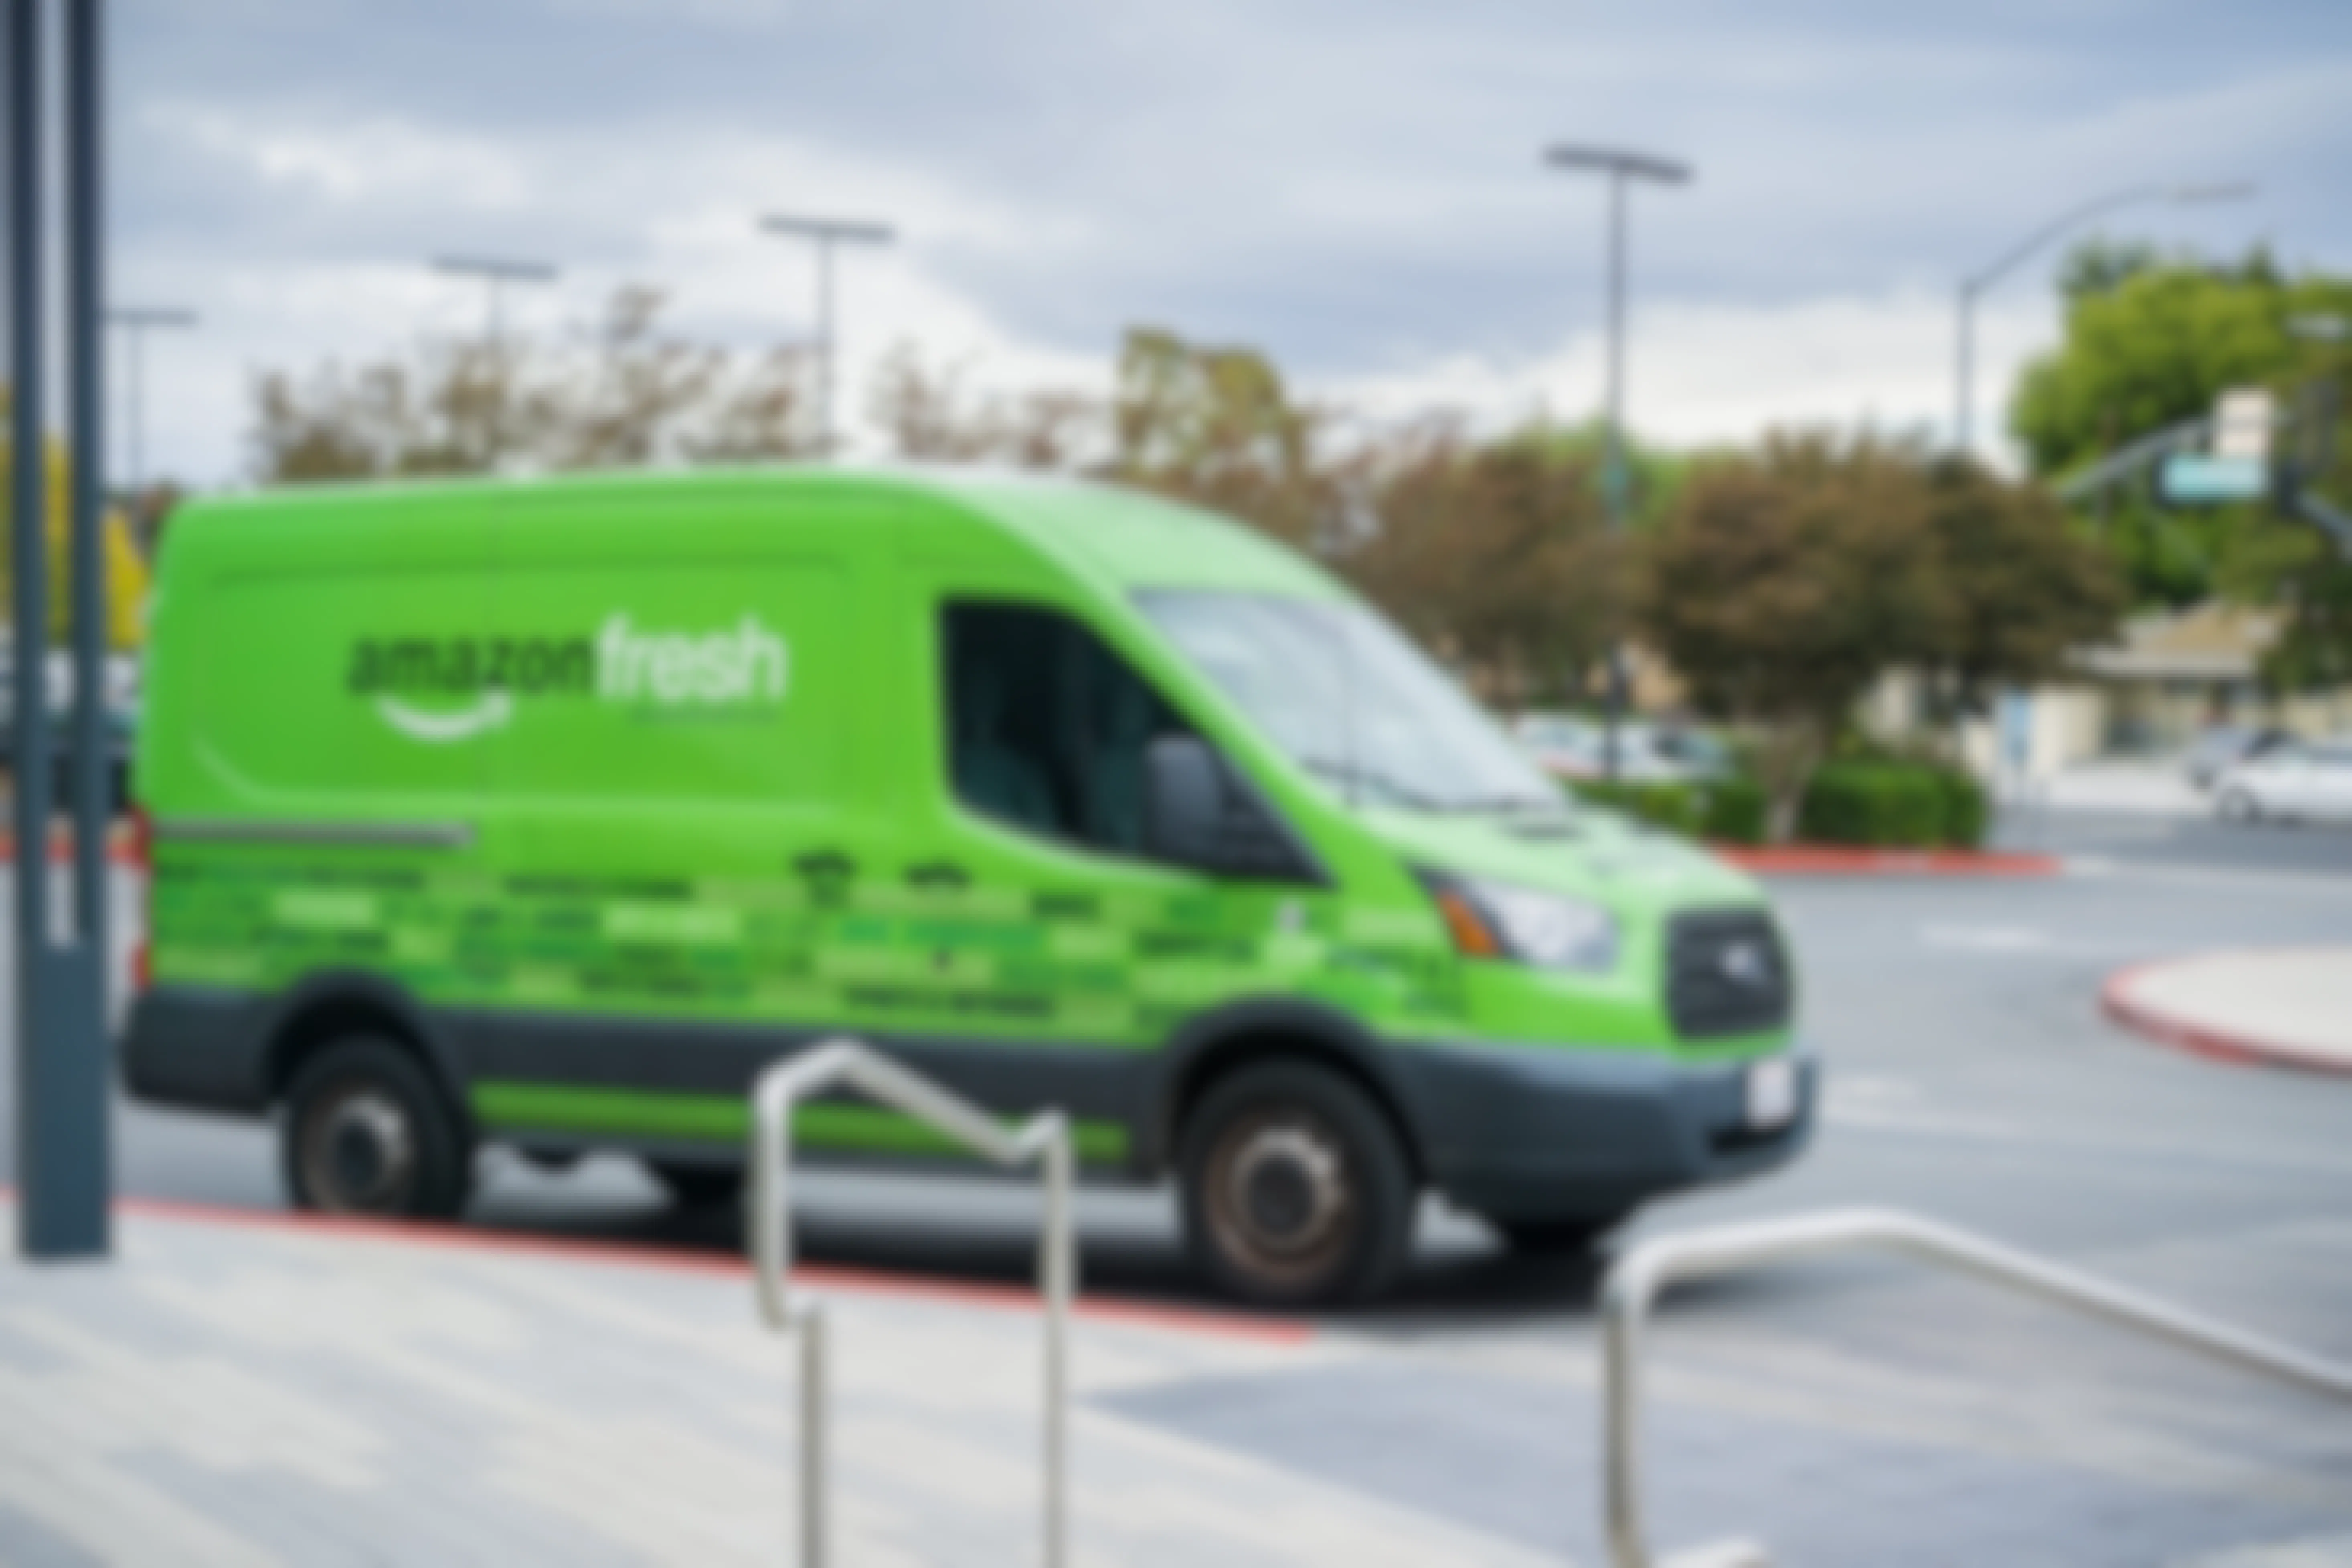 A green amazon fresh delivery truck parked in a parking lot.